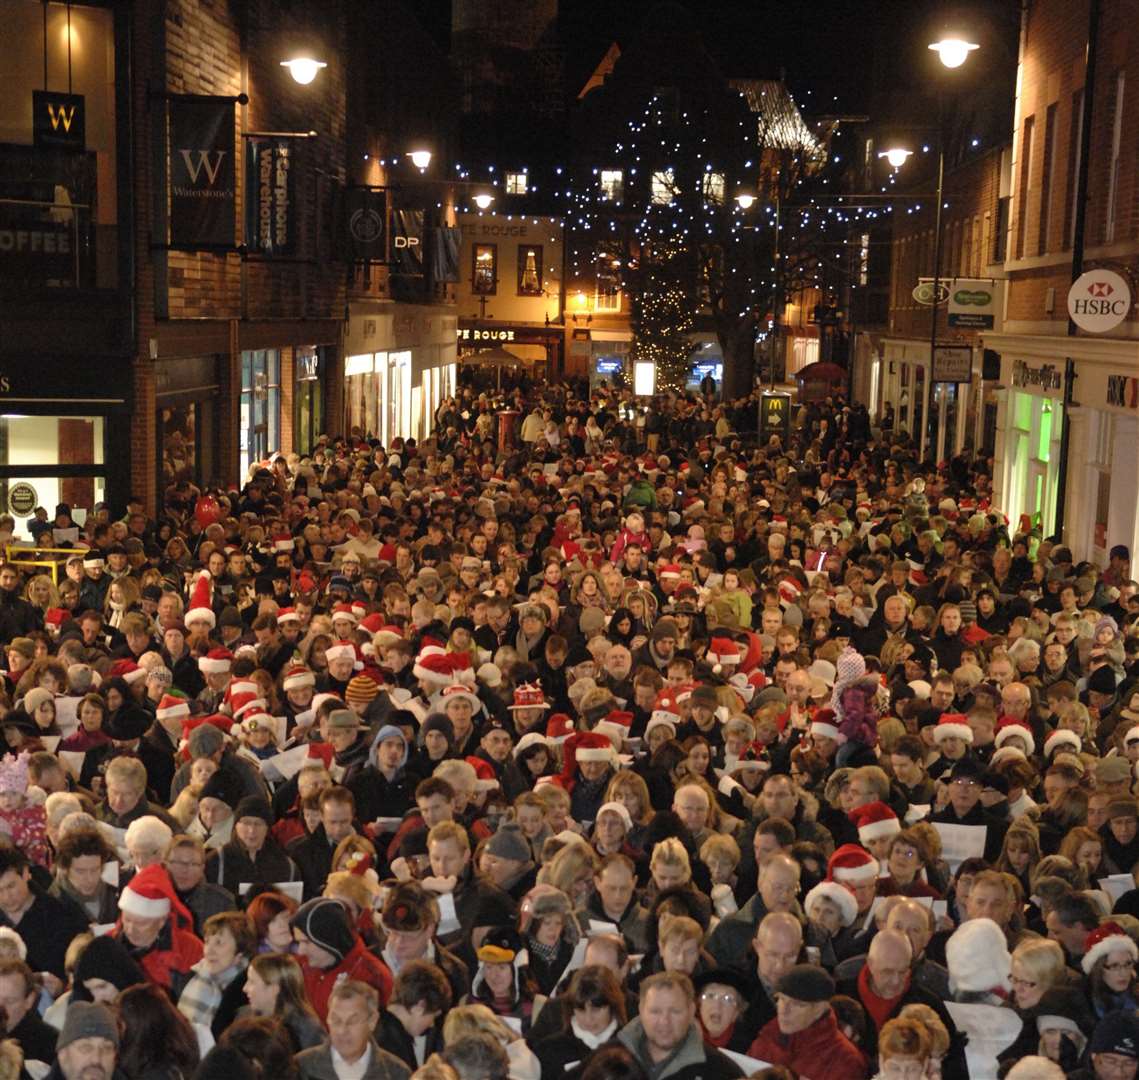 The popular event in years past has seen Rose Square attract huge crowds on Christmas Eve. Picture: Chris Davey